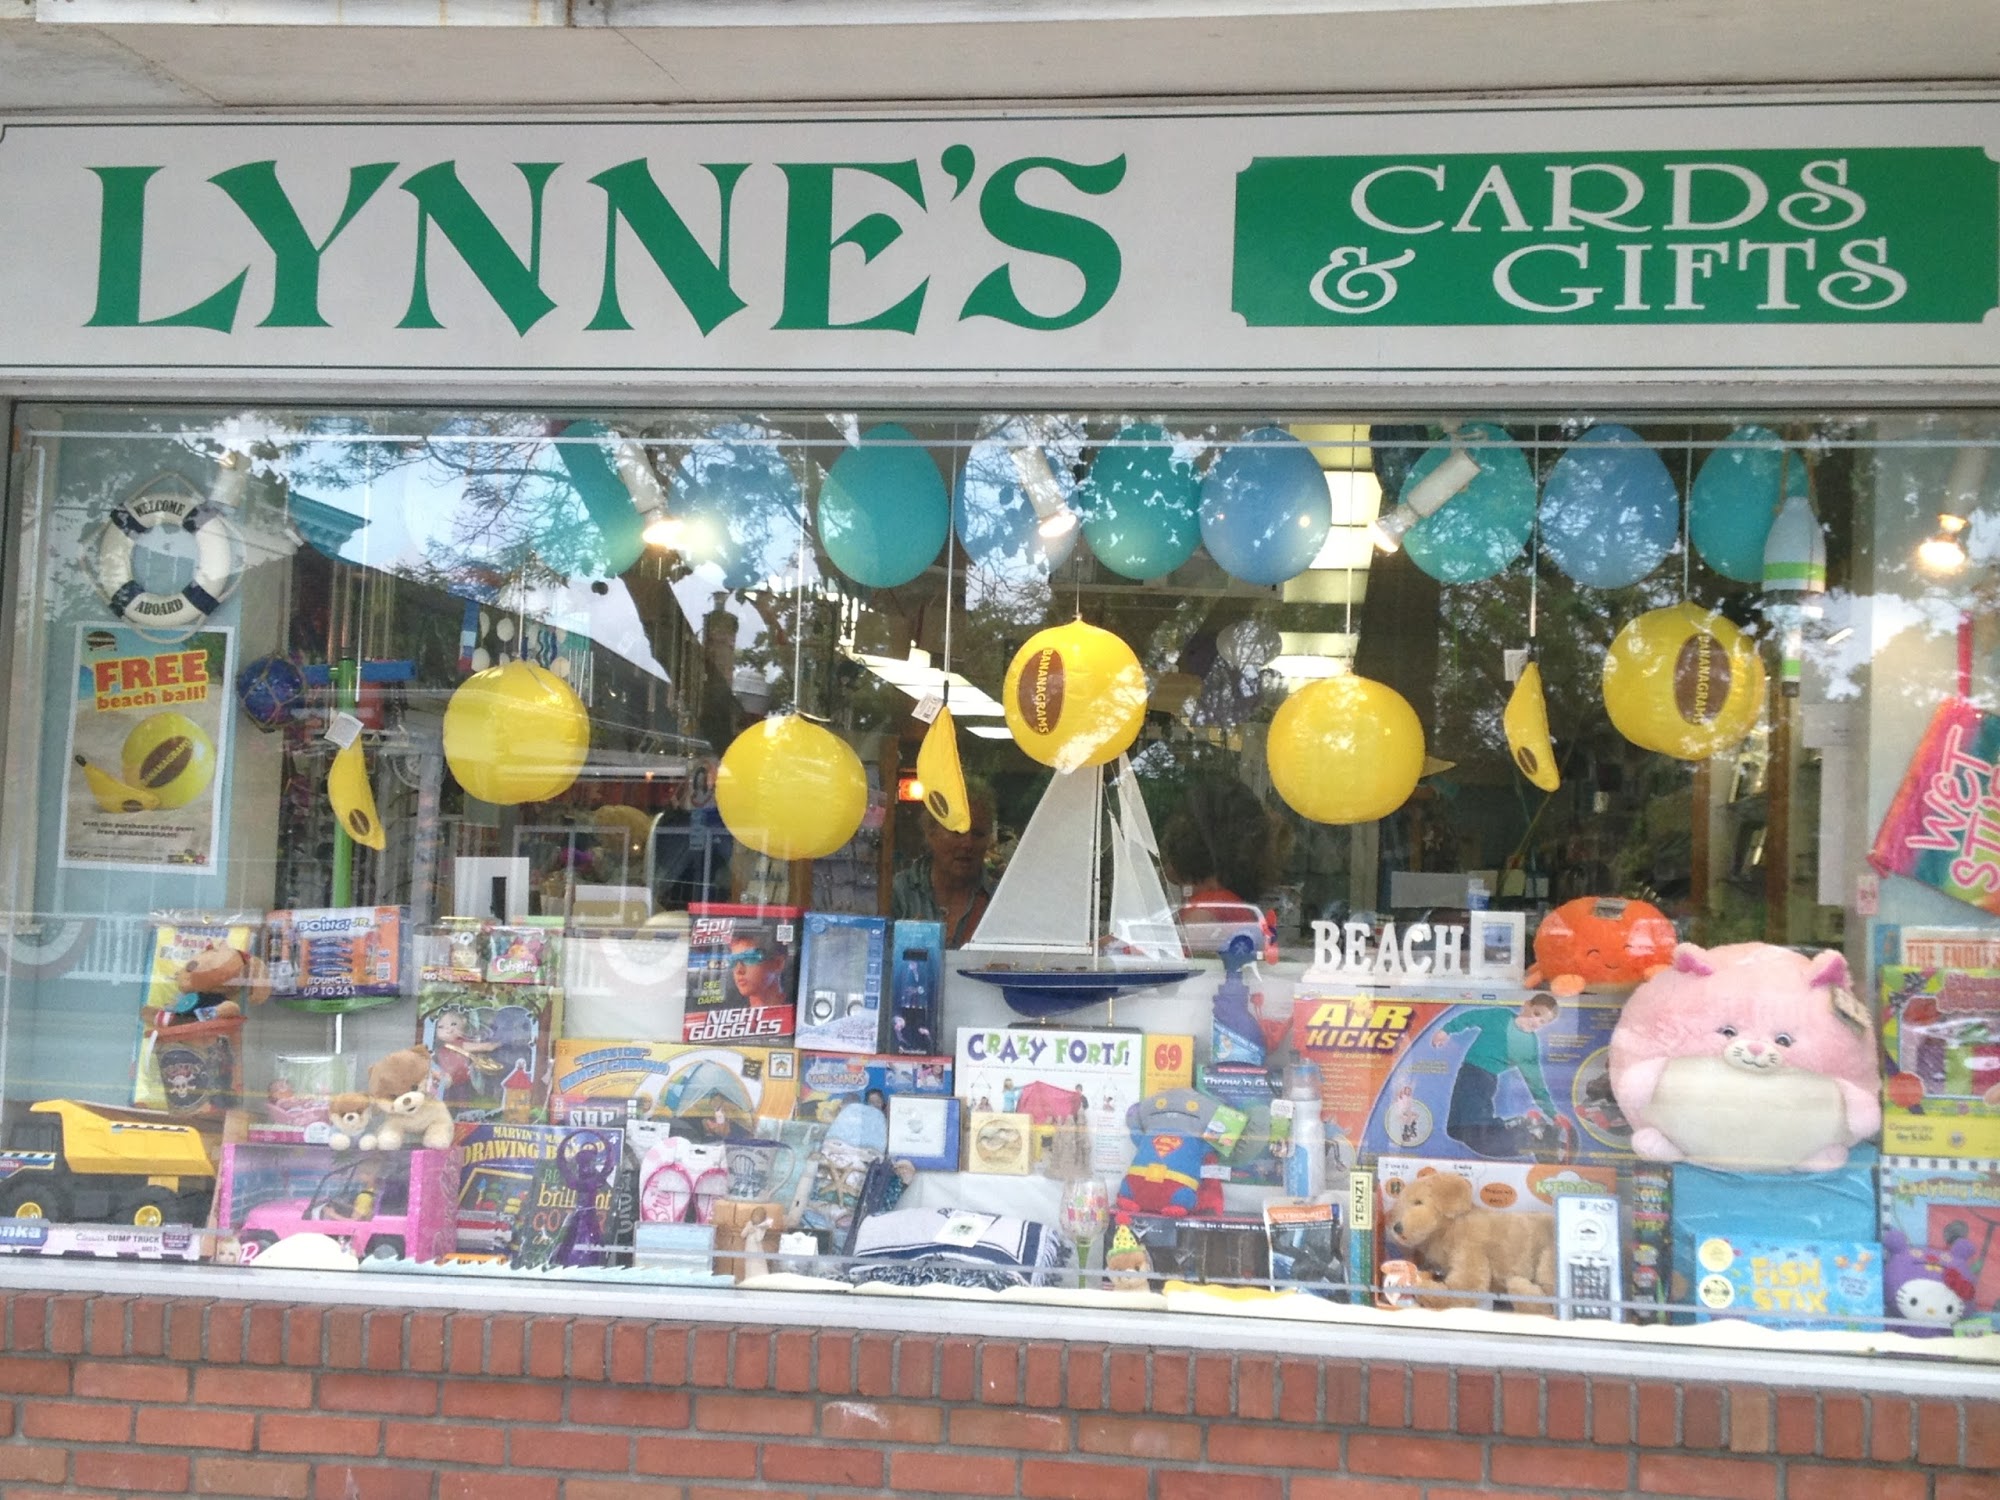 Lynne's Cards & Gifts